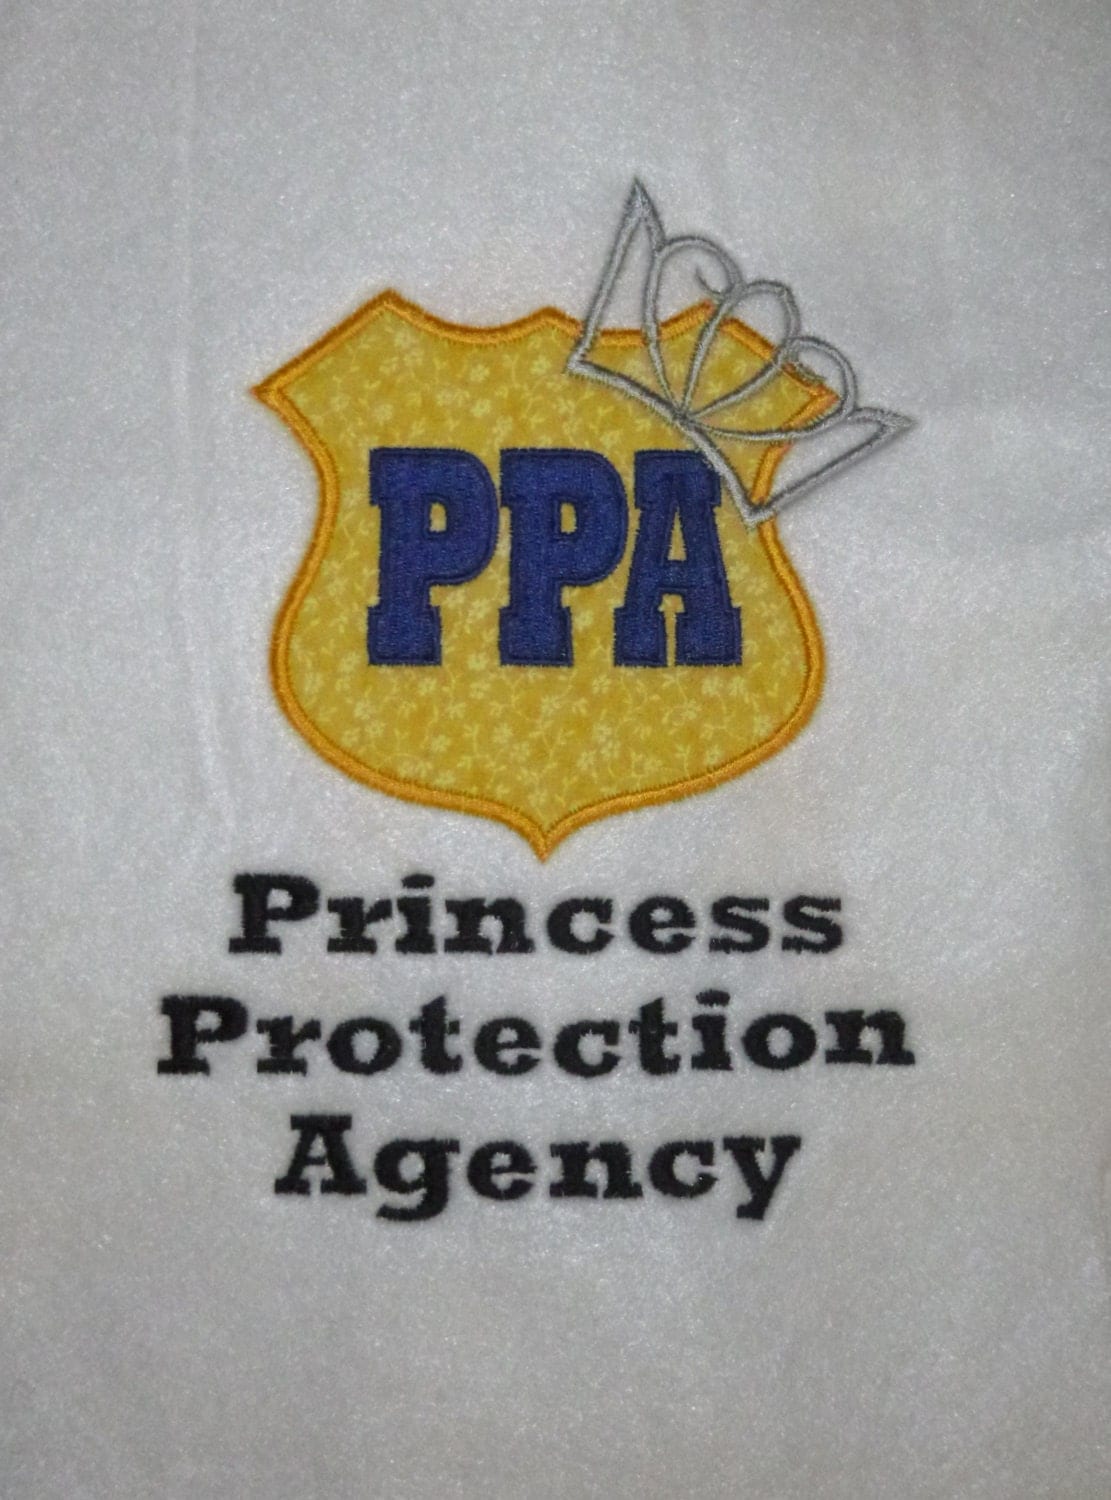 Download Princess Protection Agency with or withOUT crown appliqued